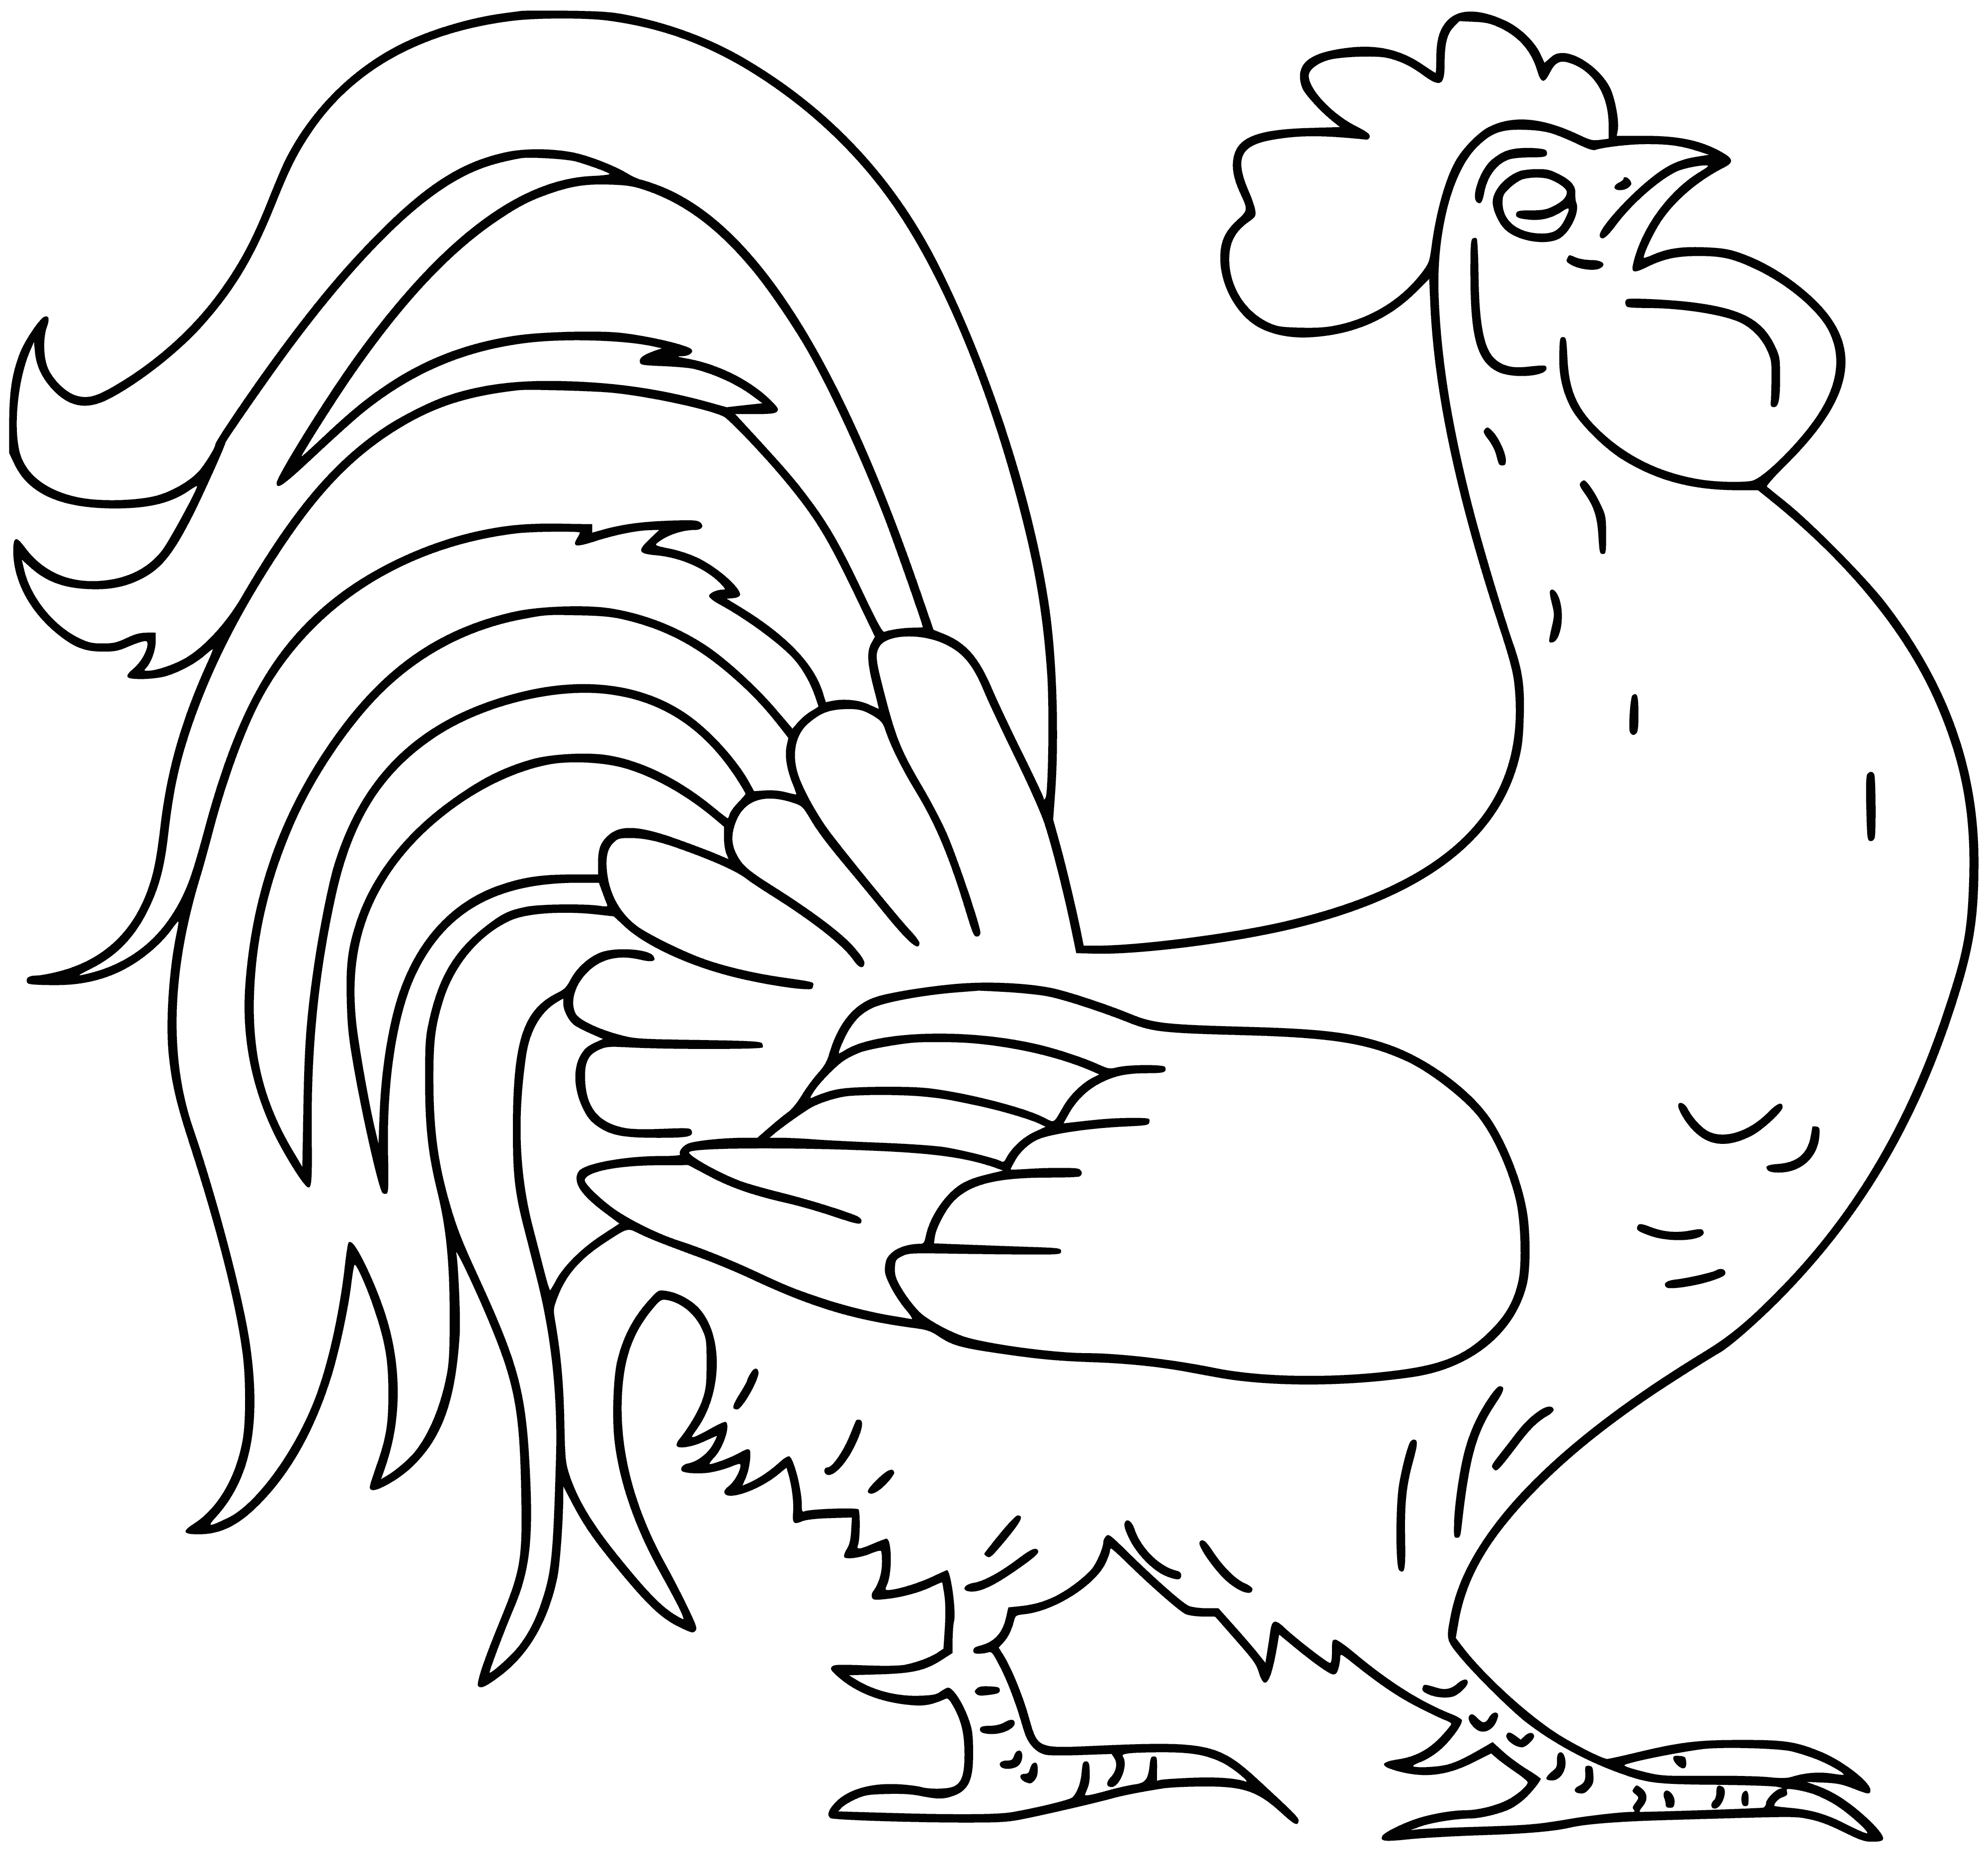 coloring page: A proud rooster stands atop a fence, head held high and tail feathers spread out. #coloringpage